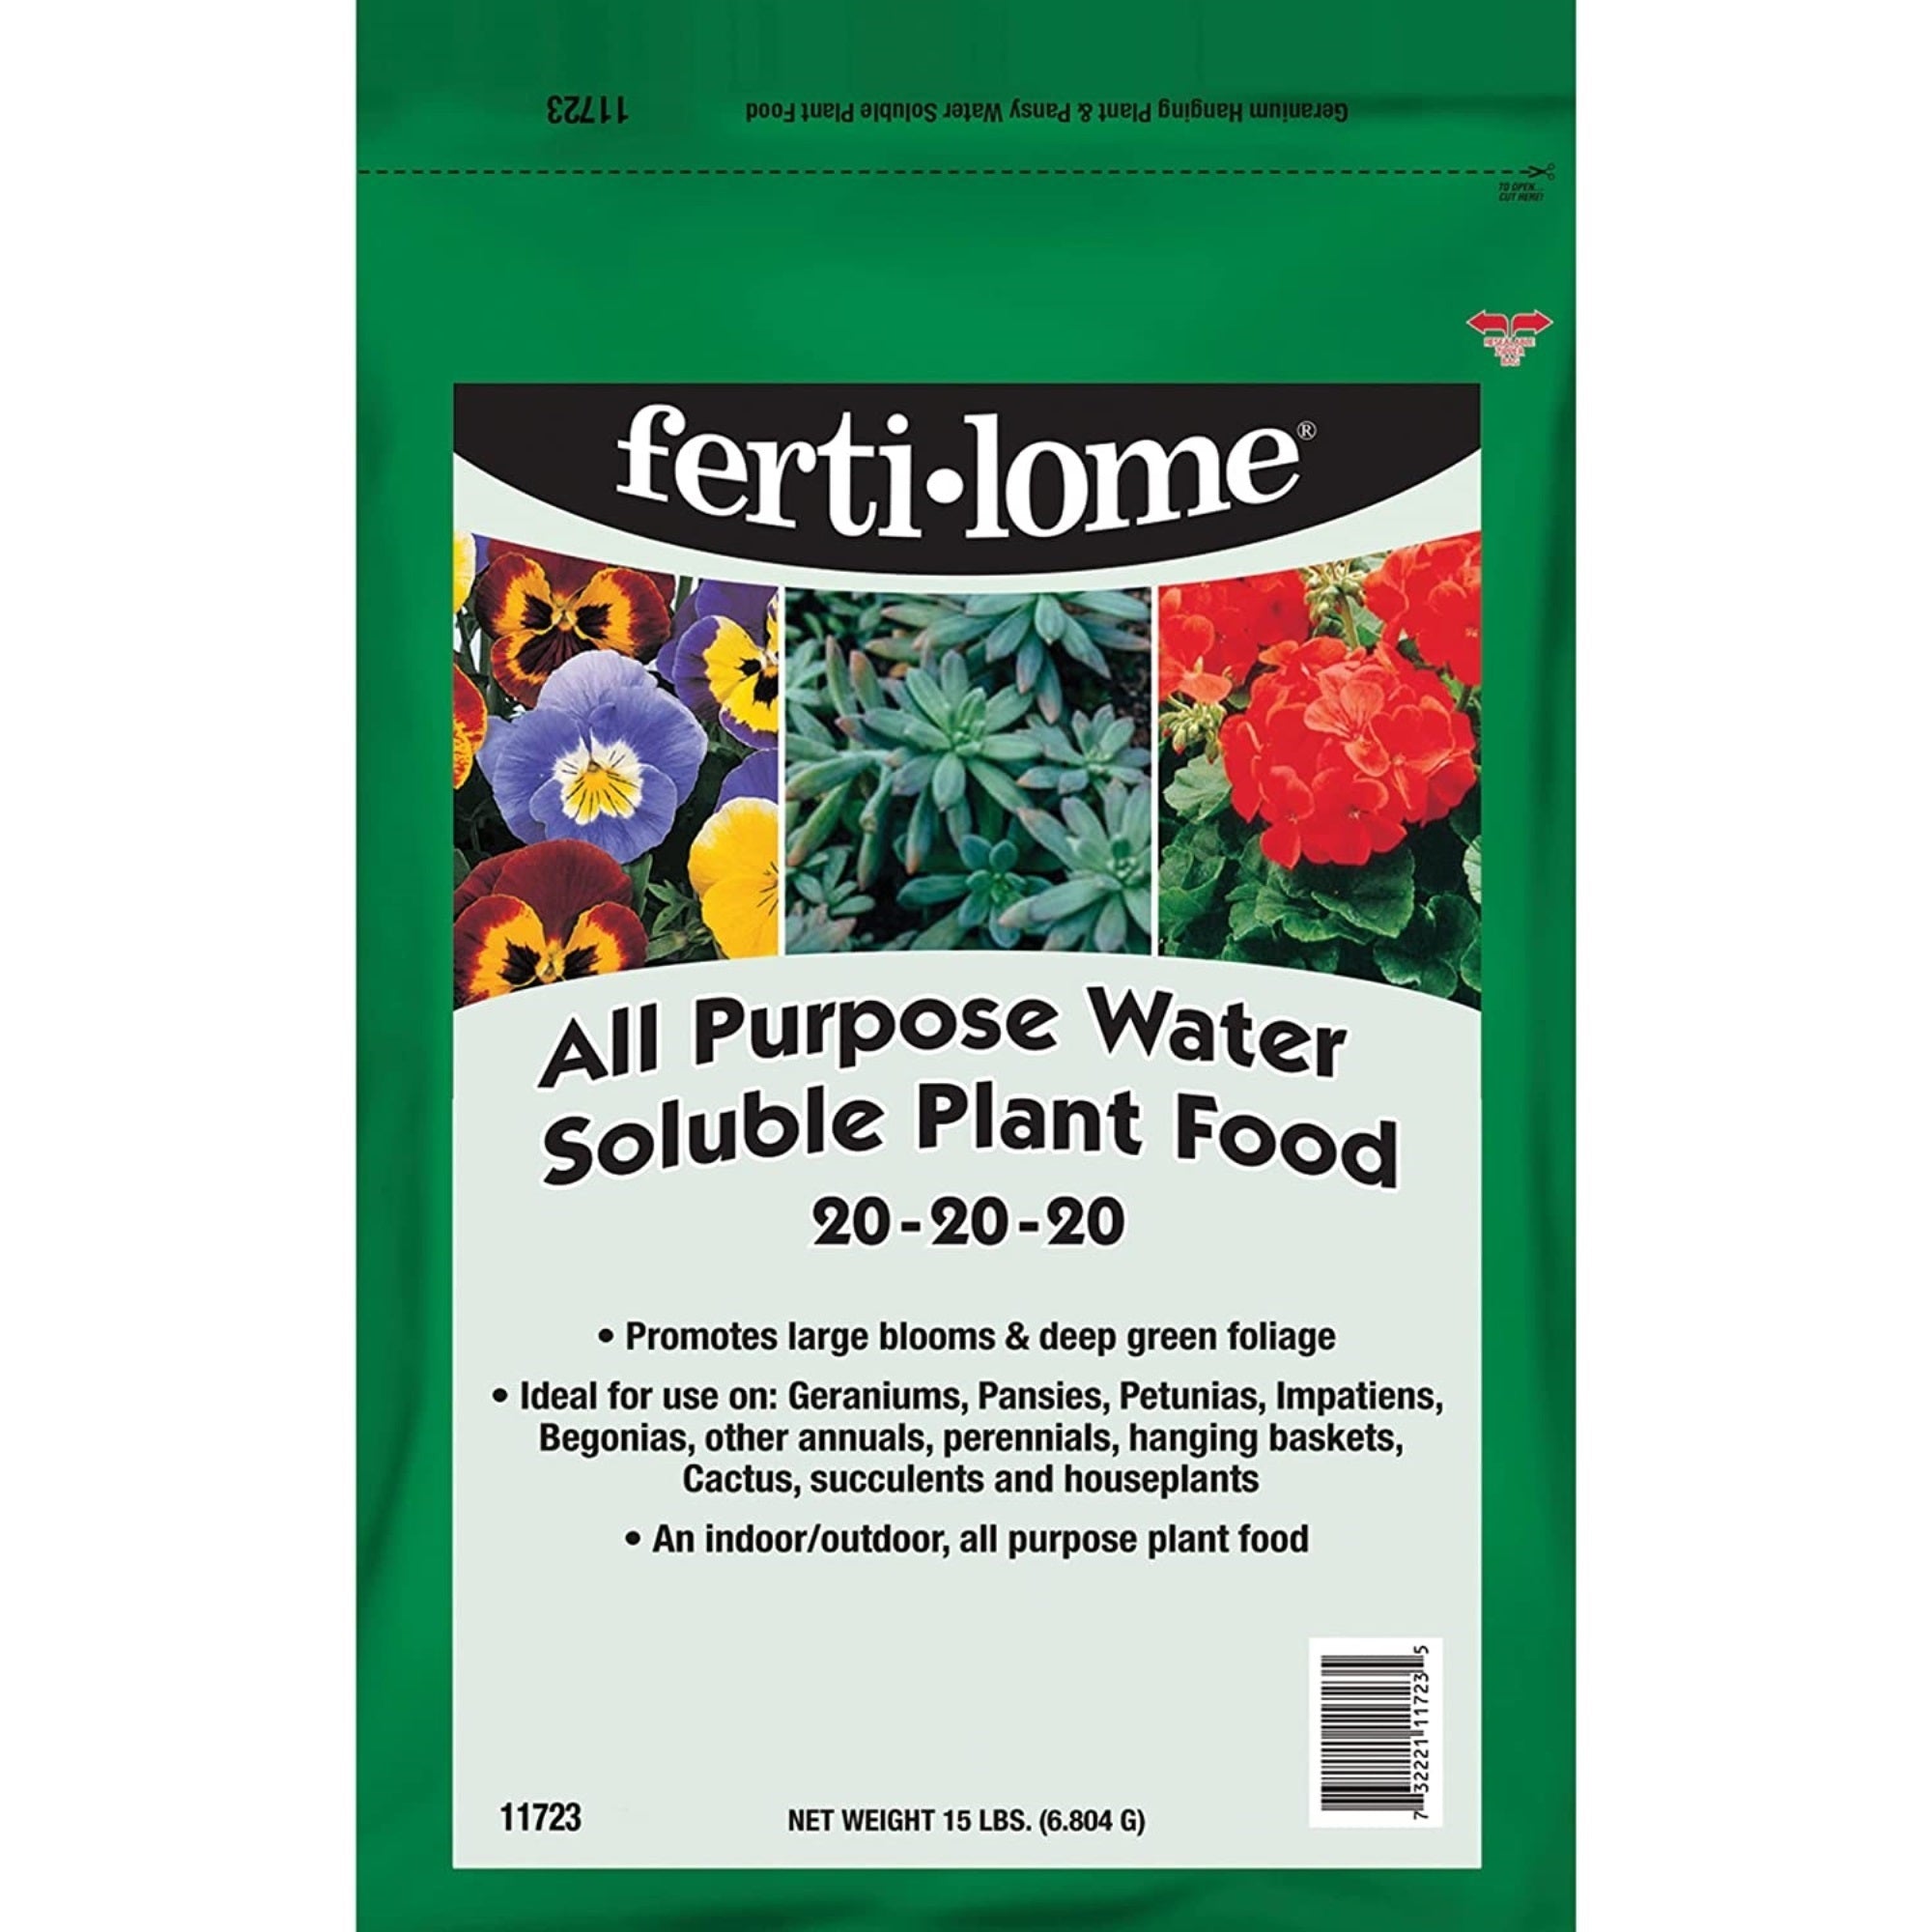 Fertilome All Purpose Water Soluble Plant Food, 20-20-20